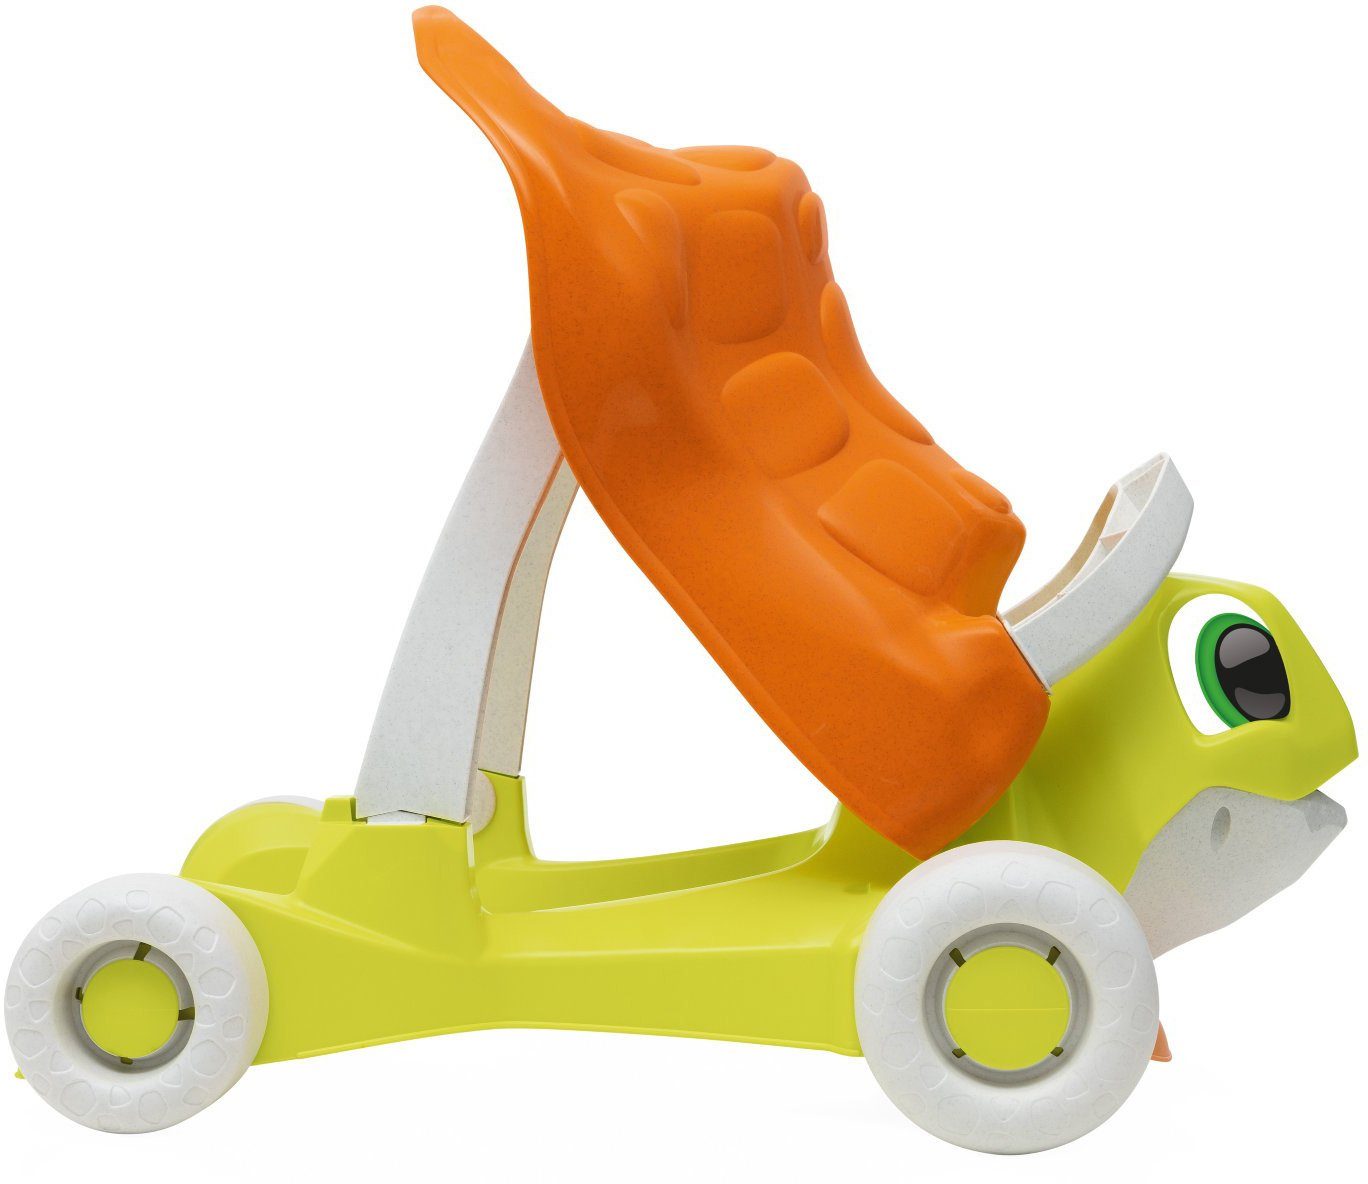 Lauflernhilfe recyceltem Turtle, Europe in aus Walk&Ride Chicco Made Material; teilweise